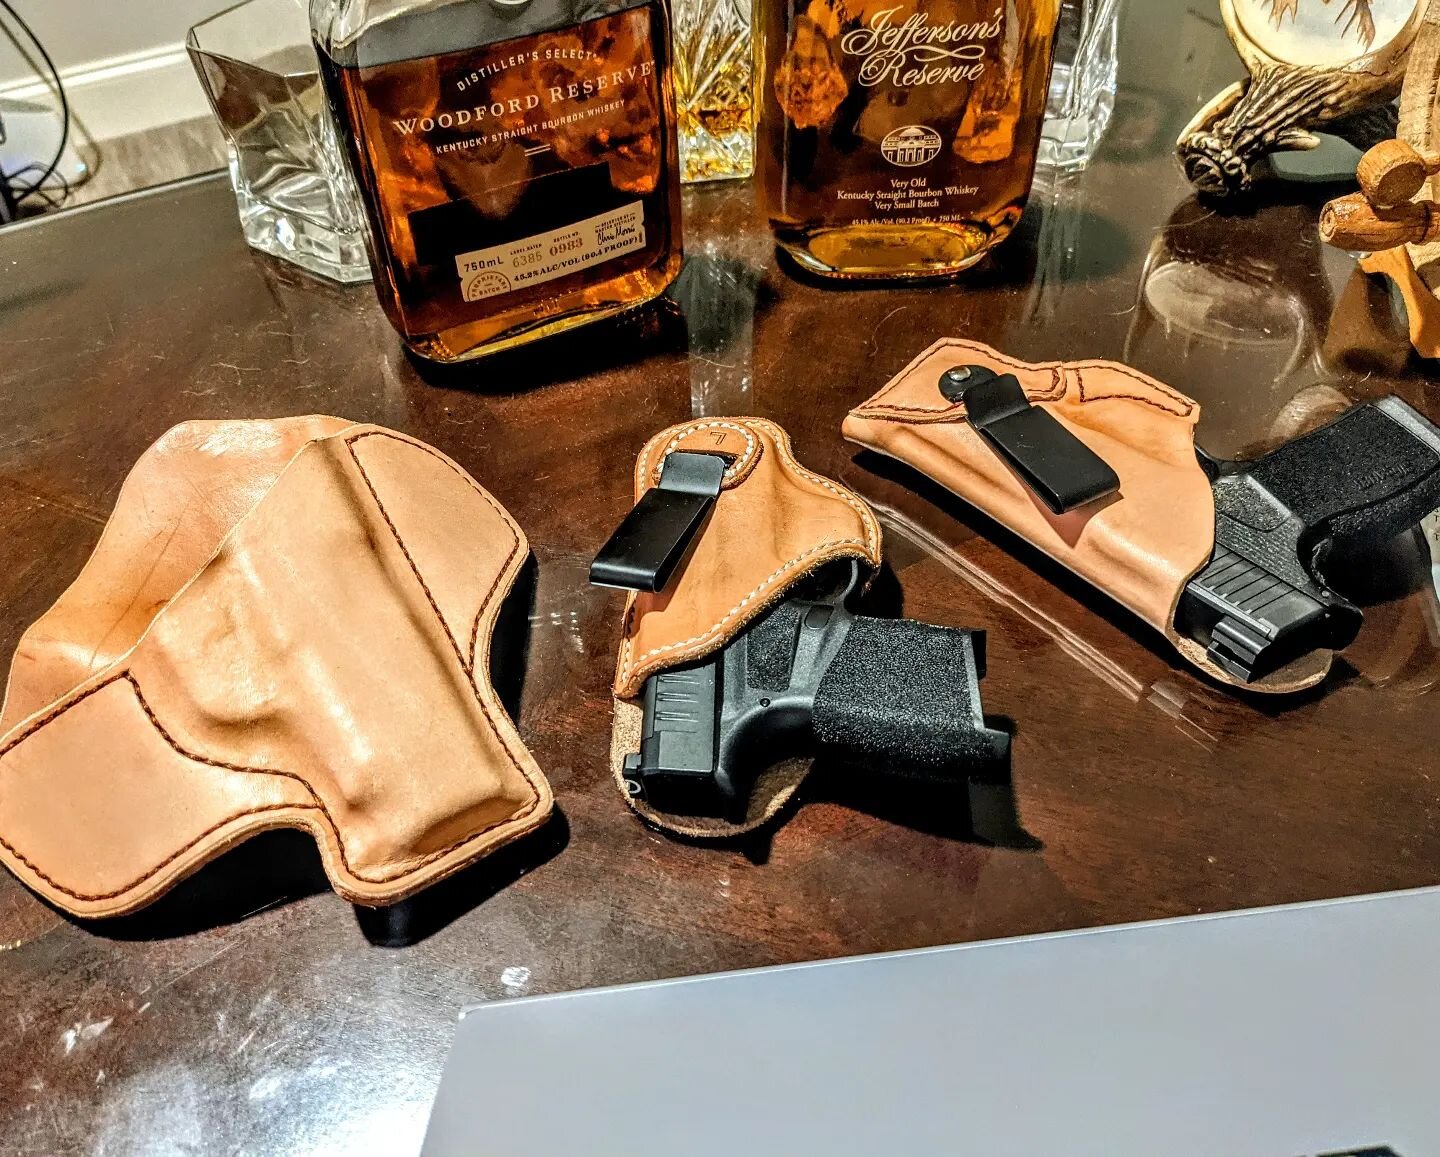 A few wet molded holsters for various compact/sub-compact models. IWB and OWB @sigsauerinc @springfieldarmoryinc 

#leather 
#leathercraft 
#leatherwork 
#saddlestitch 
#vegtan 
#concealedcarry 
#handmade 
#madeinamerica 
#2a